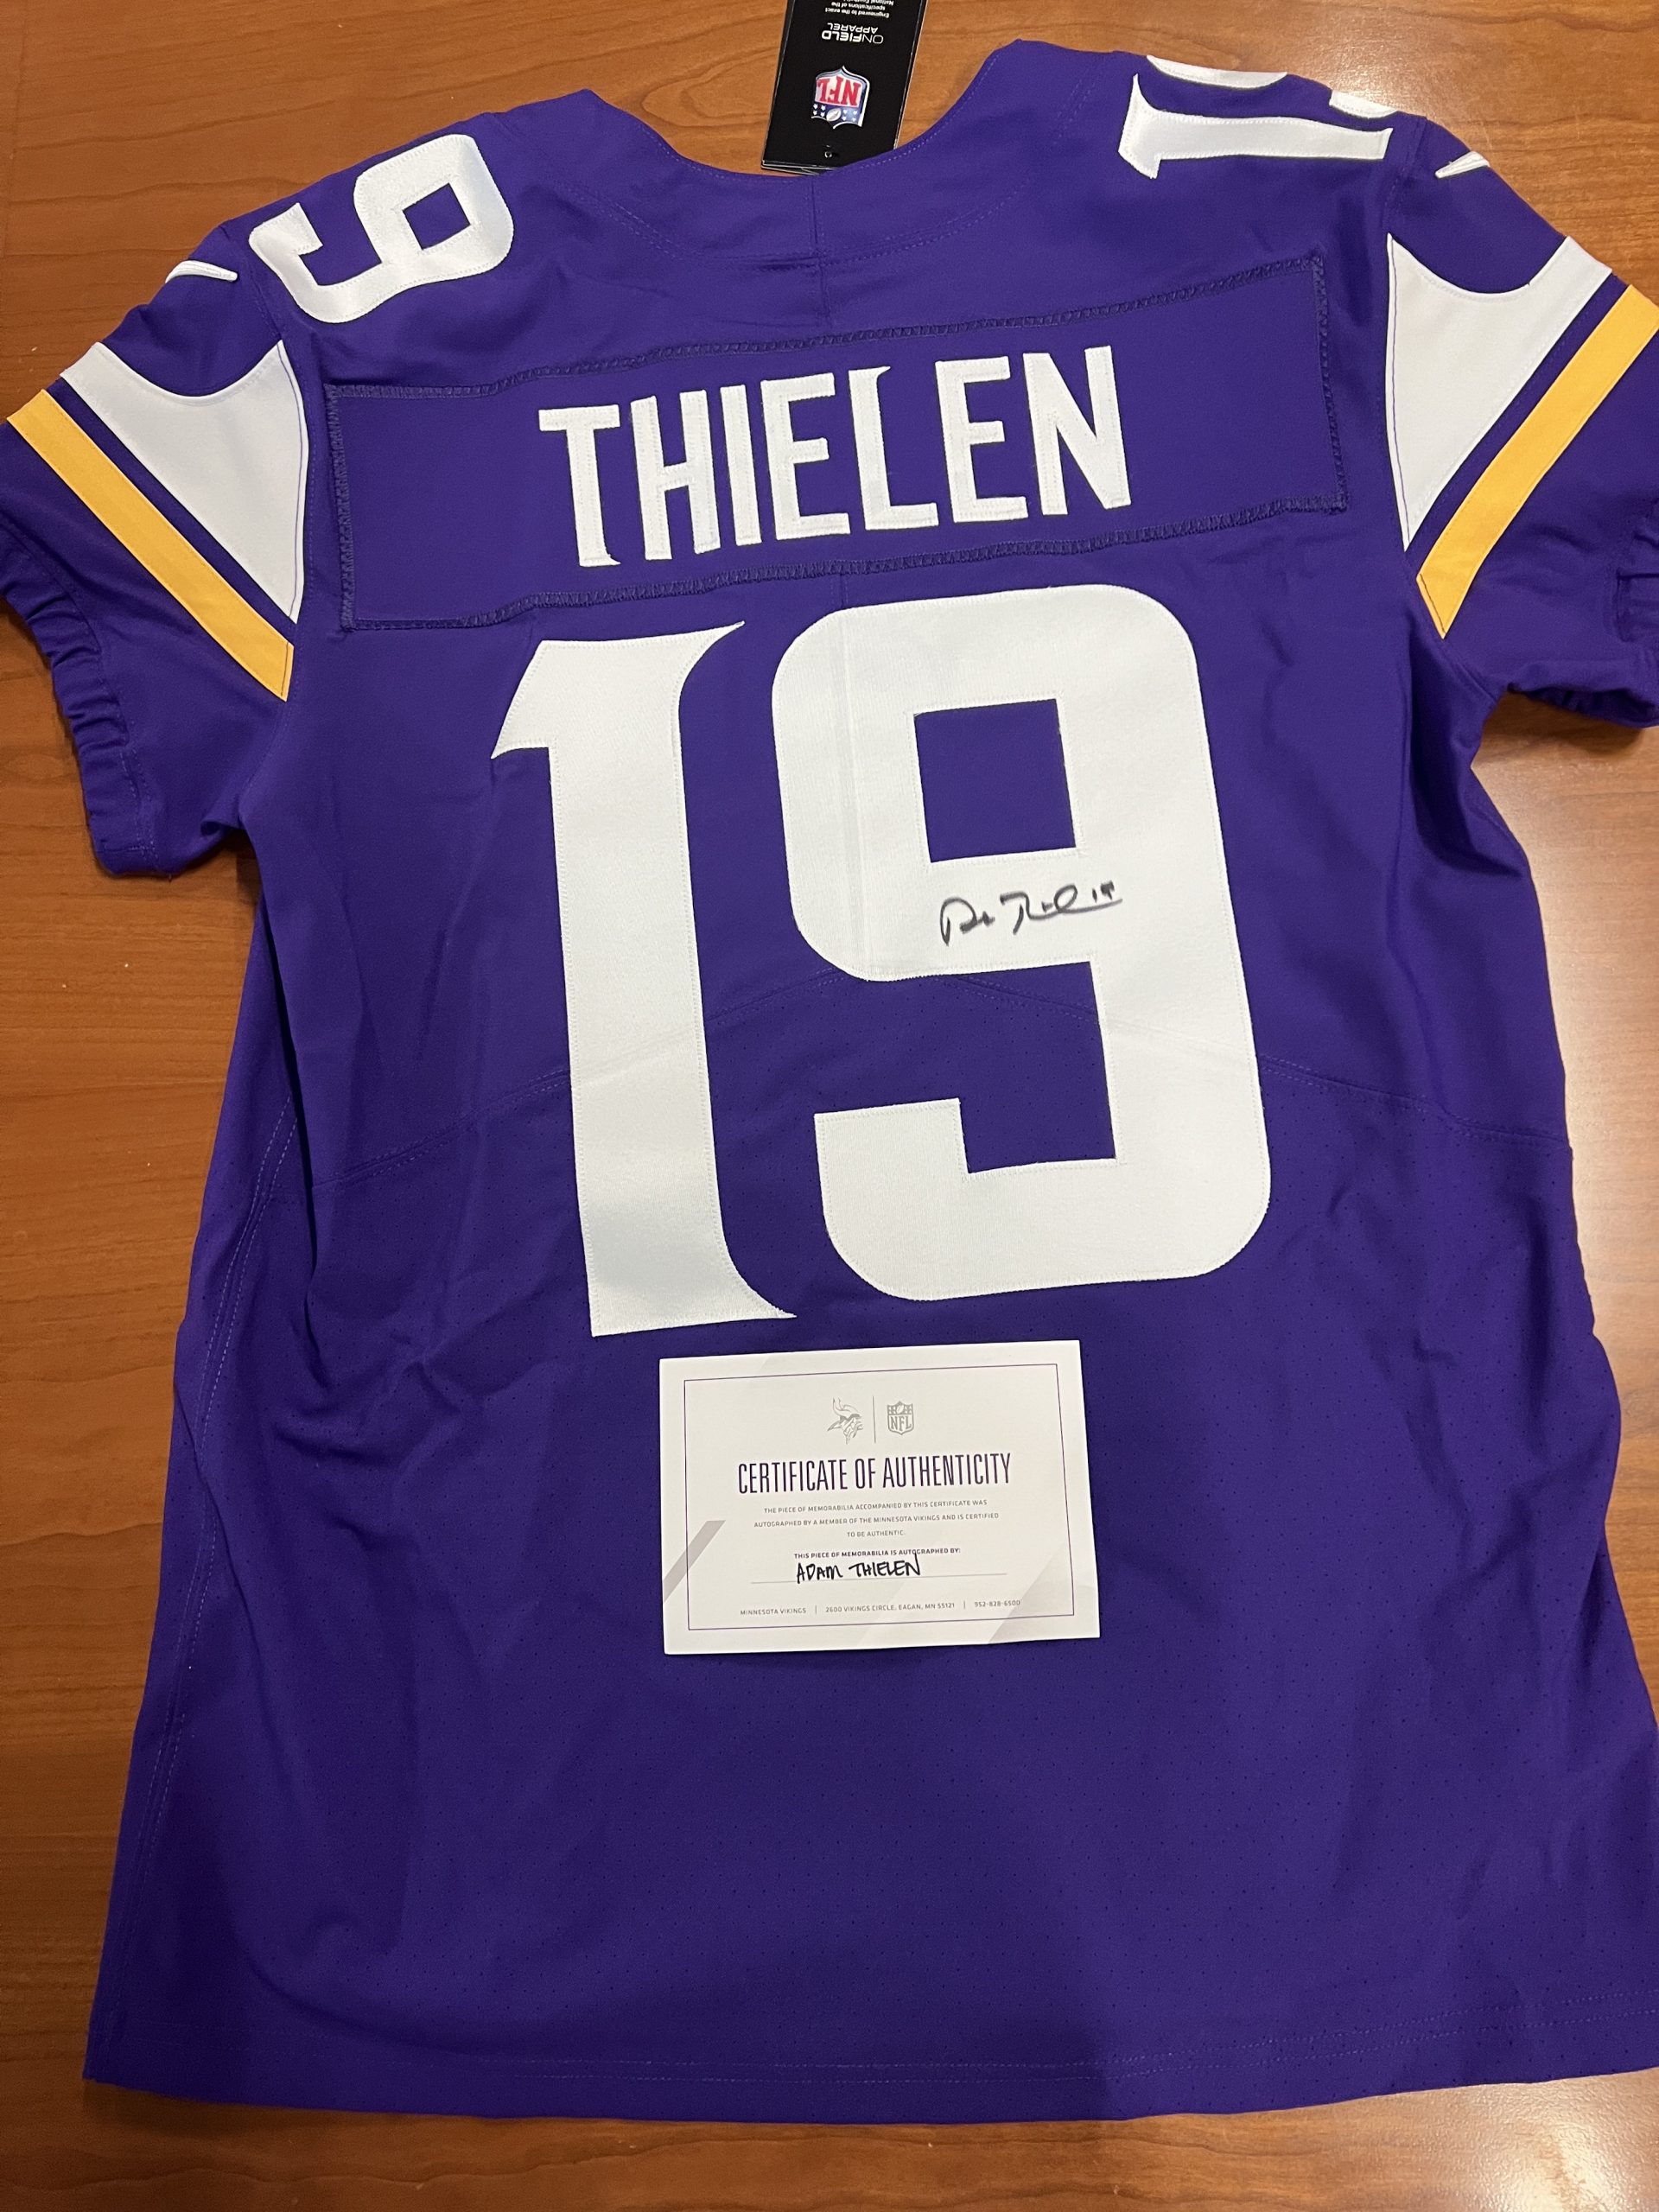 Thielen Signed Jersey » United Heroes League